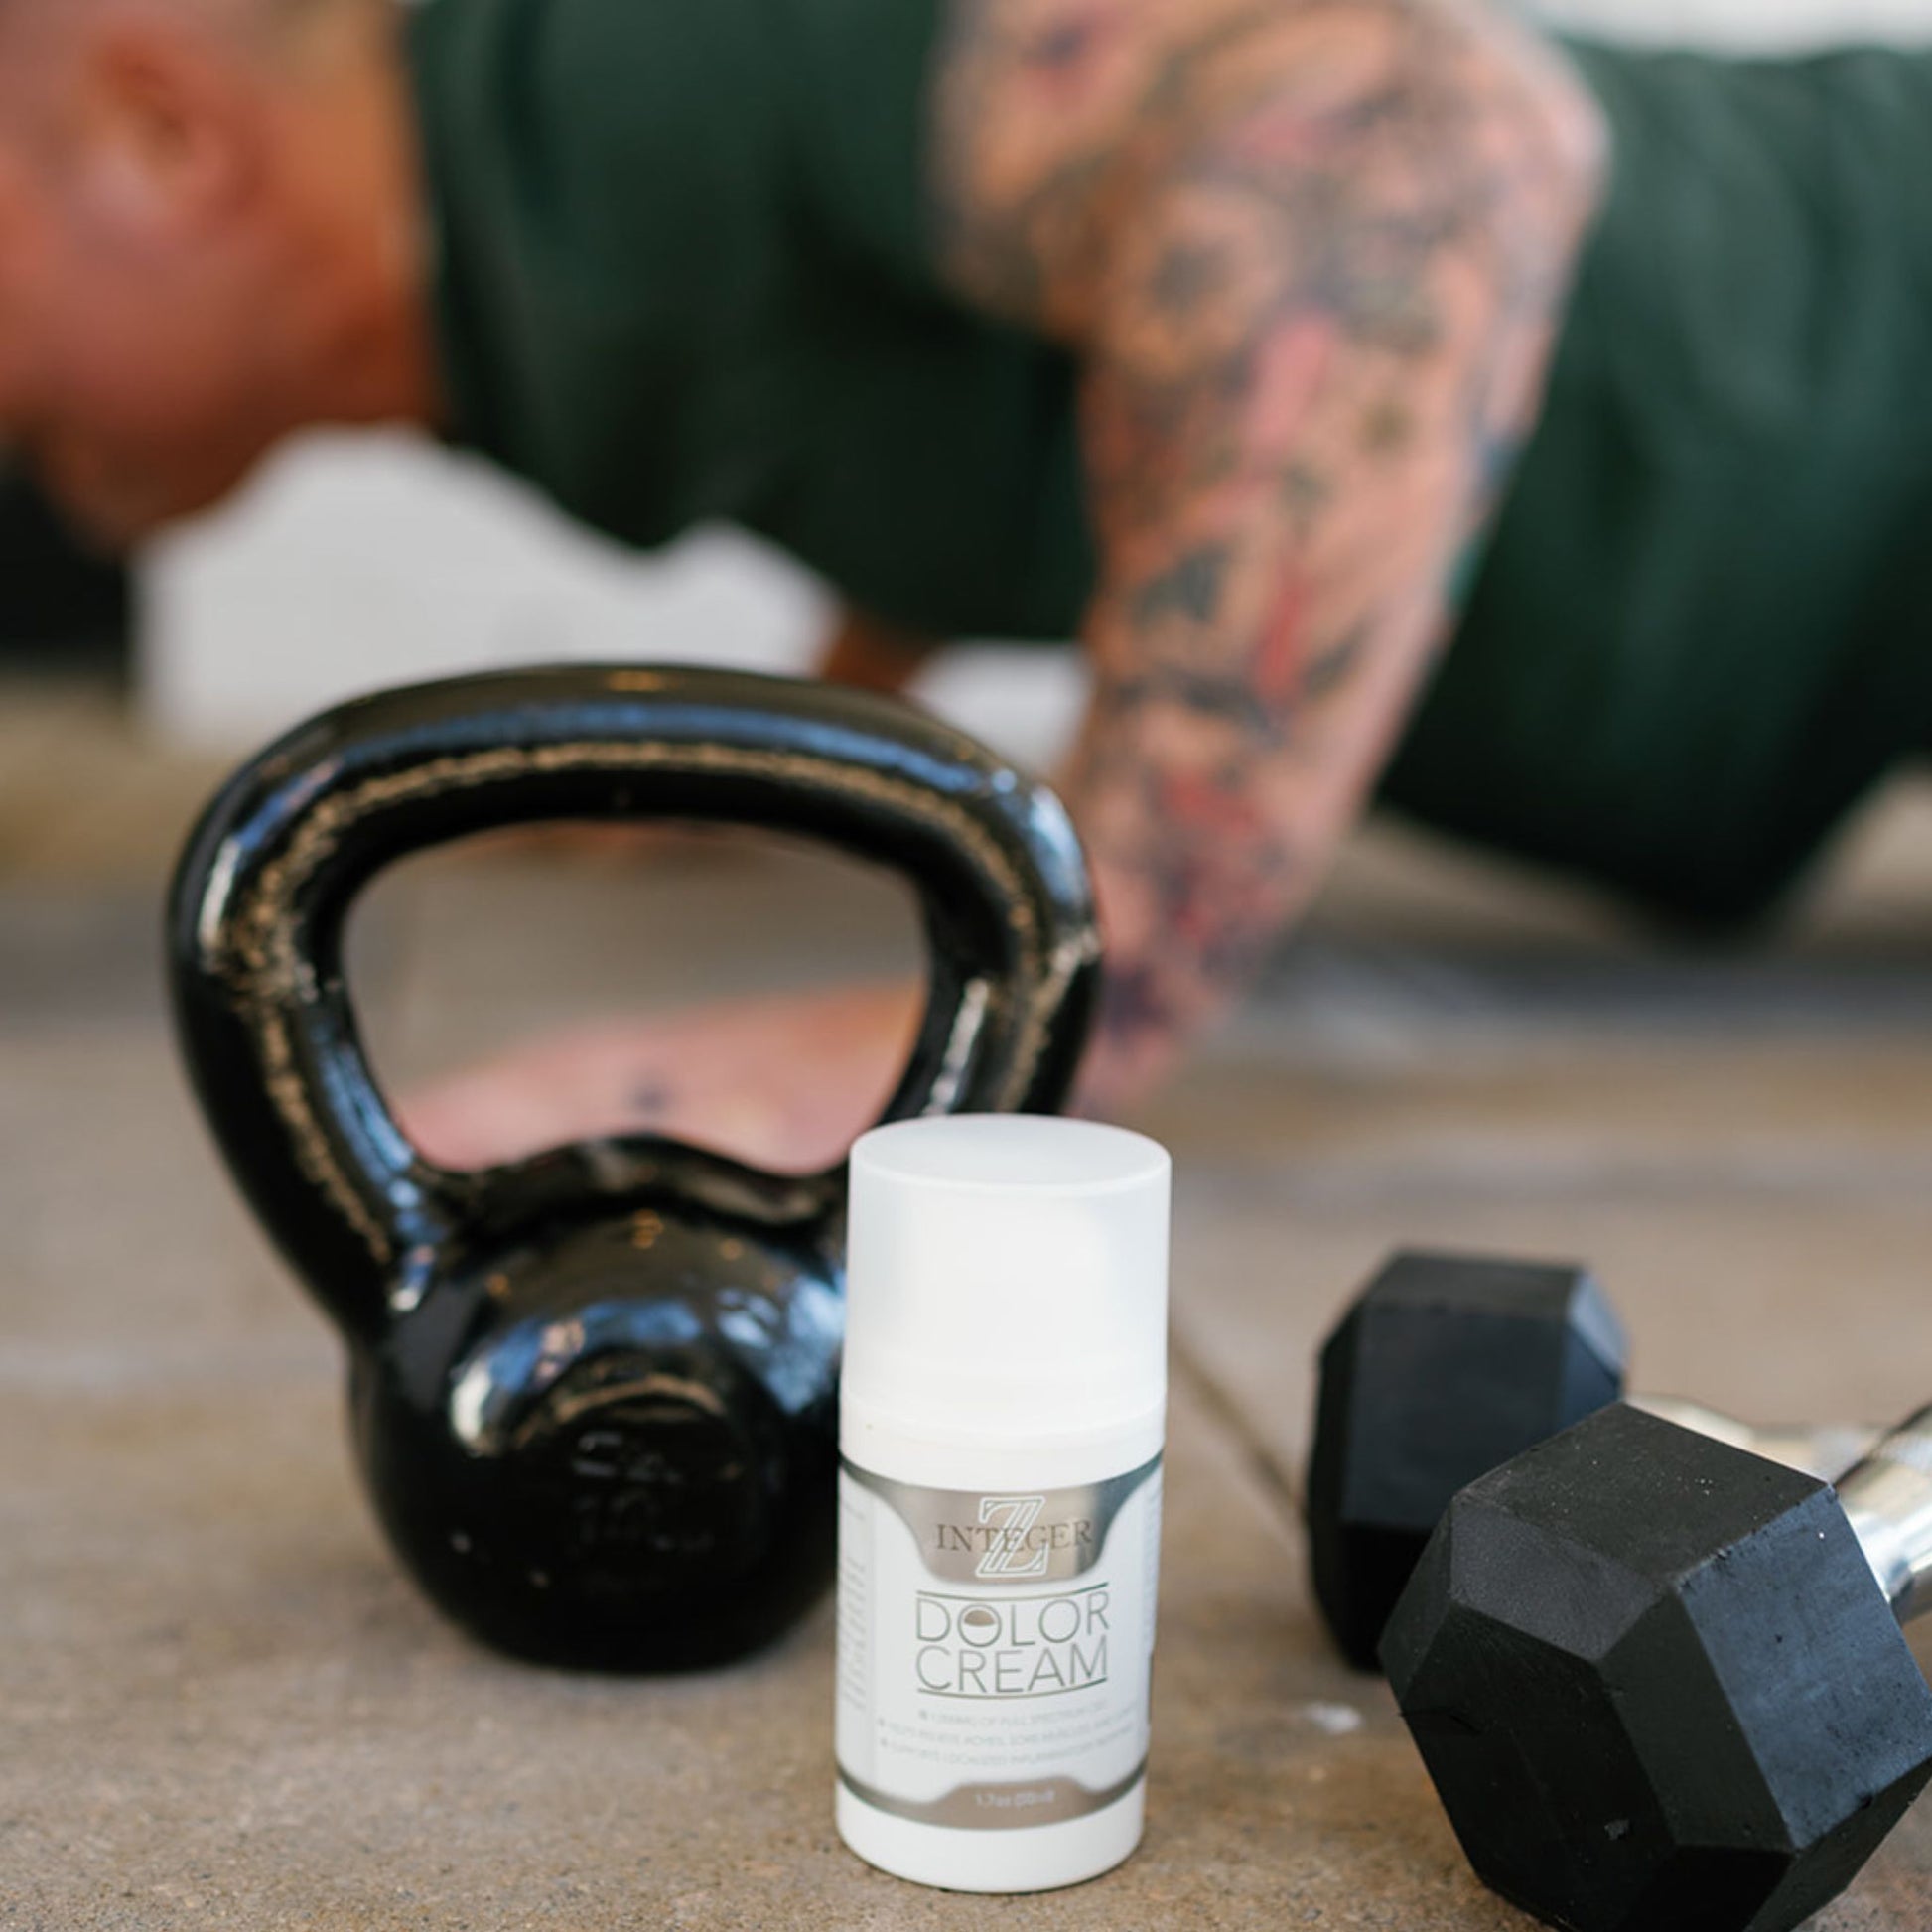 Dolor cream infront of a kettlebell and two dumbbells. Behind the weight there is a man in a green shirt with tattoos doing a push-up